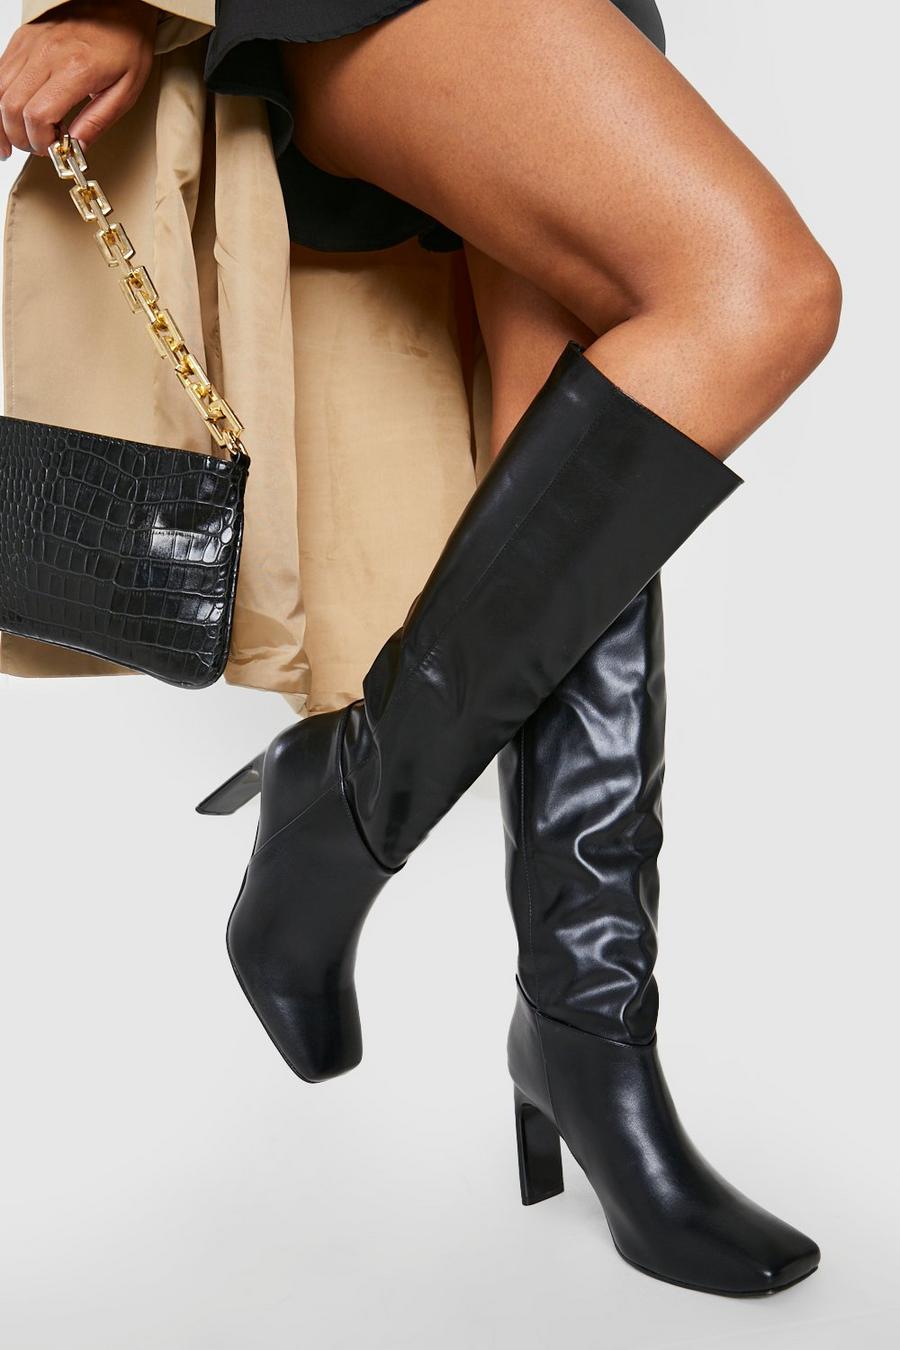 Black Square Toe Knee High Boots